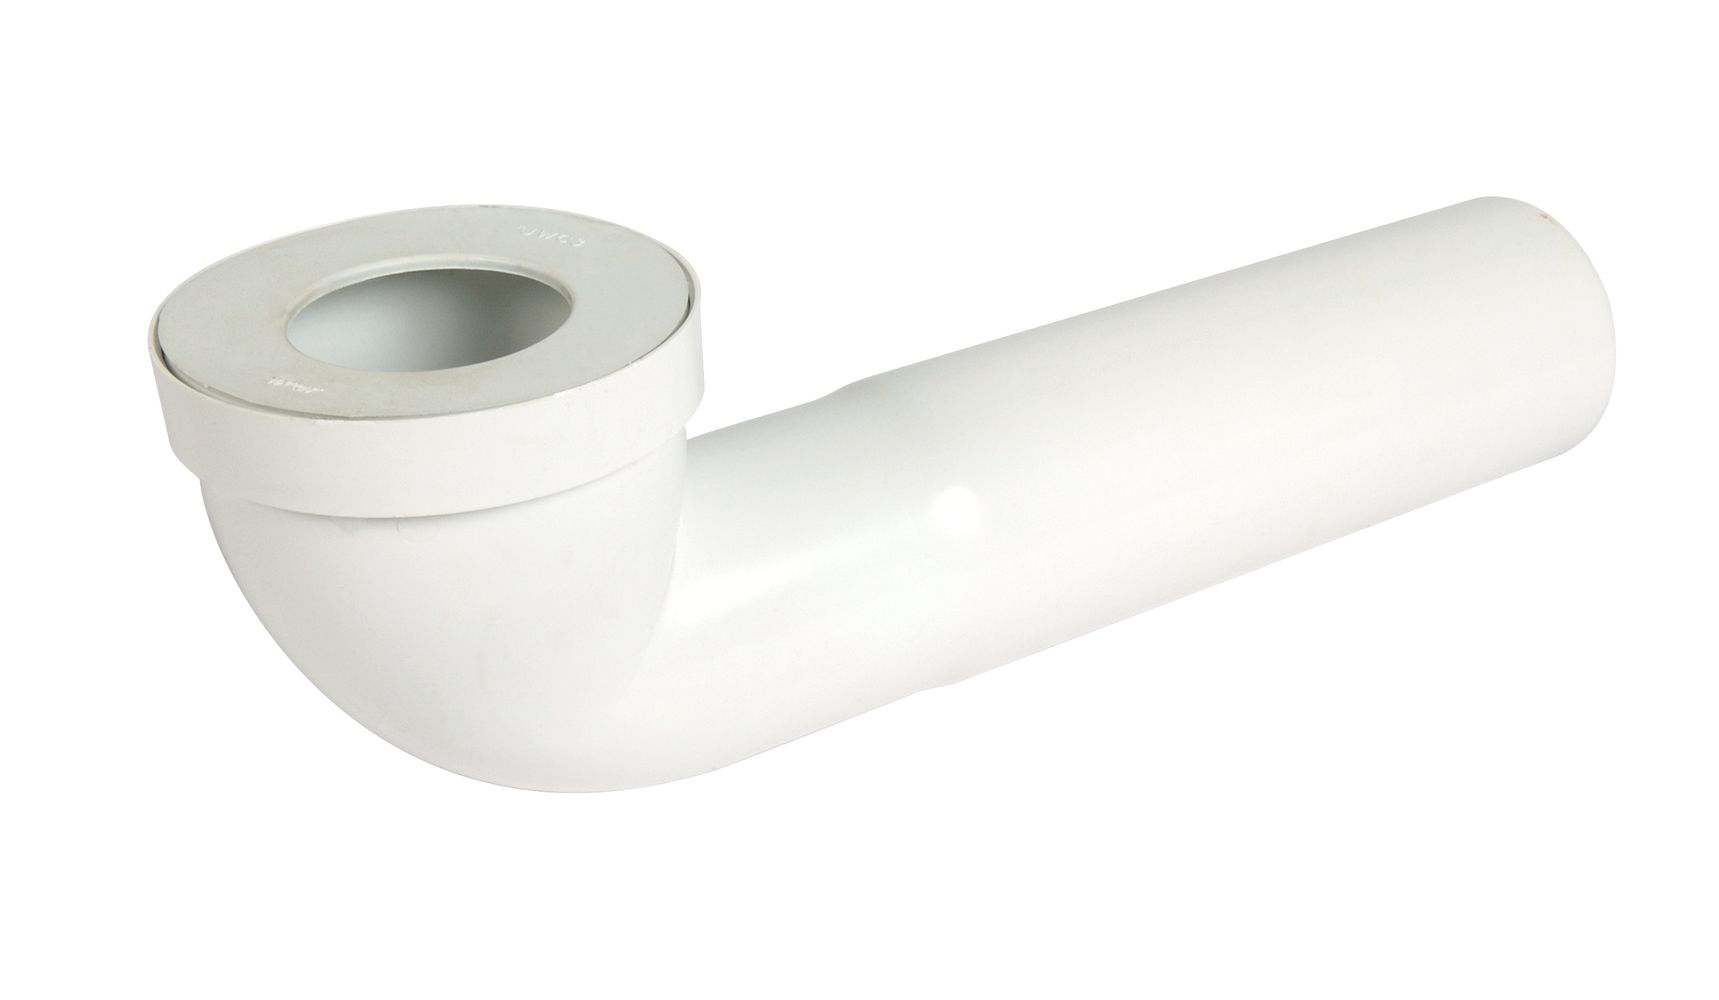 pipe-wc-longue-400mm-joint-85-107-d93-ctw5540-nicol-0